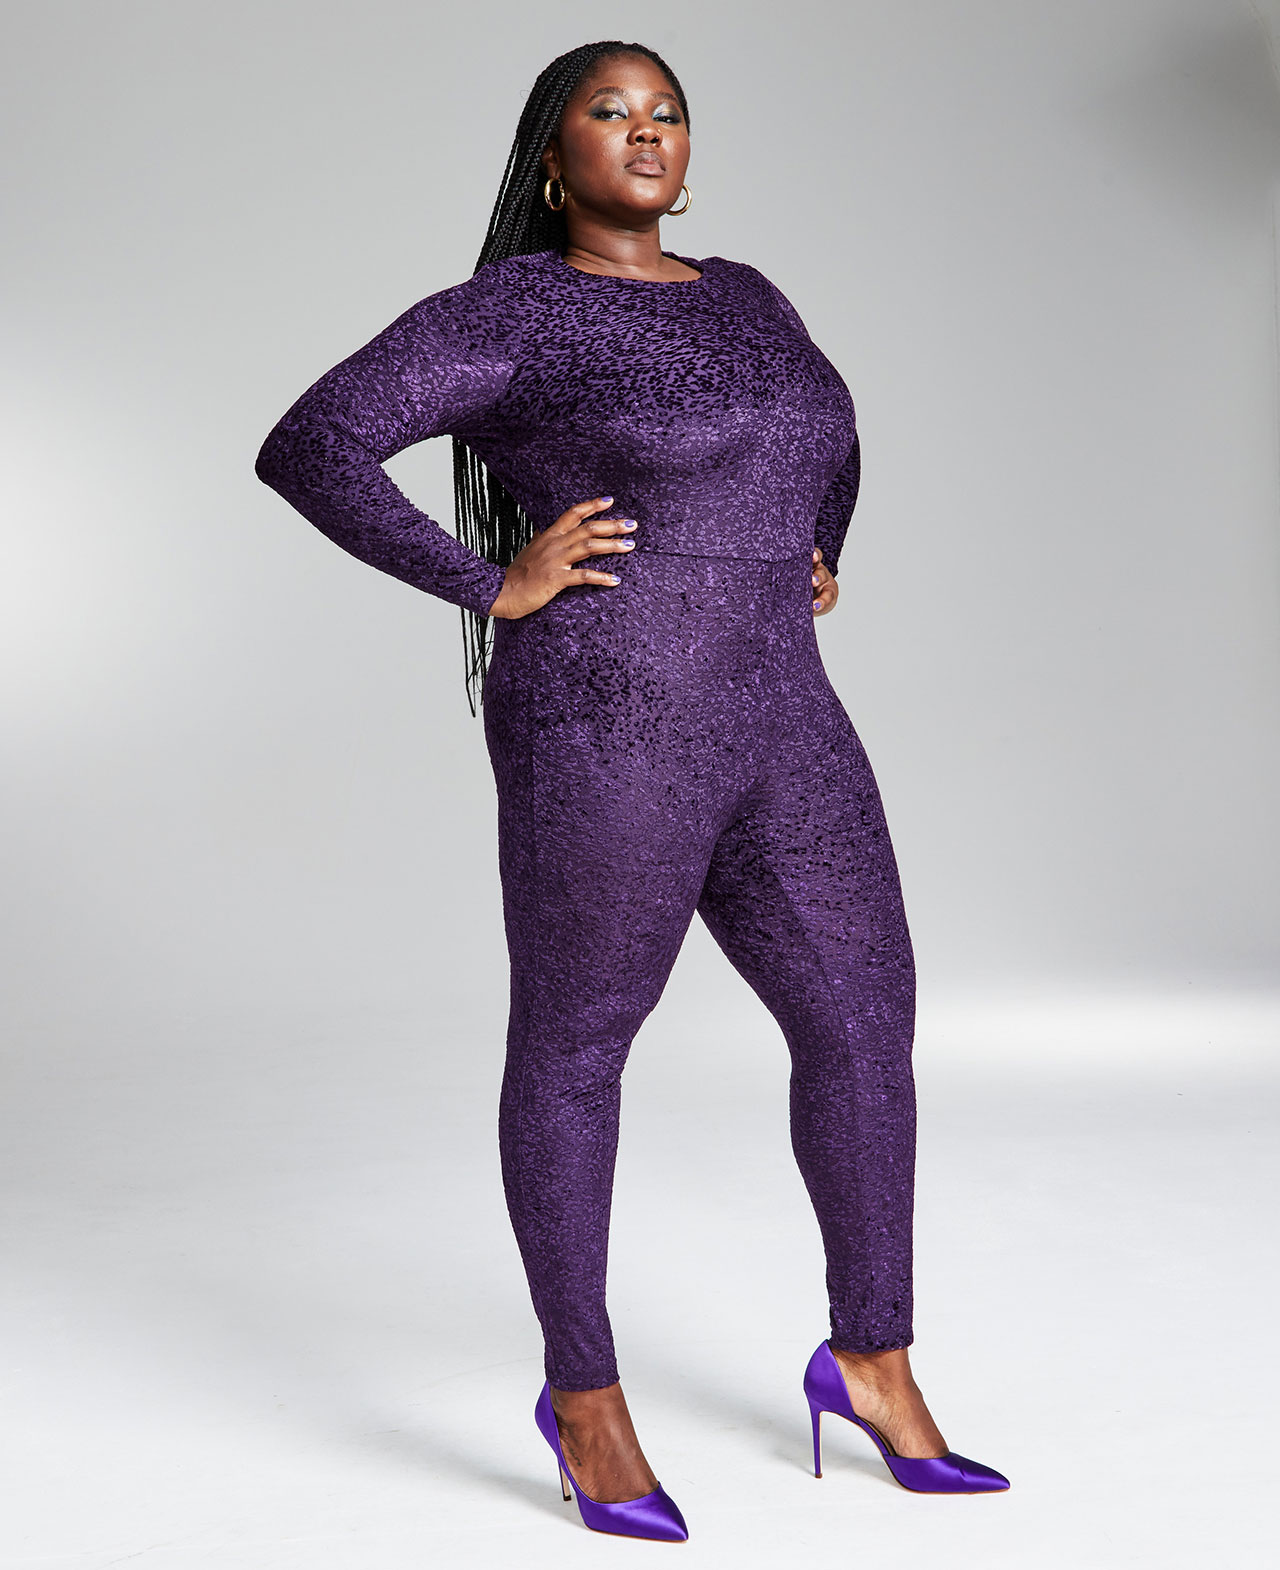 Macy's Icons Of Style Features GooGoo Atkins Plus Size Clothing